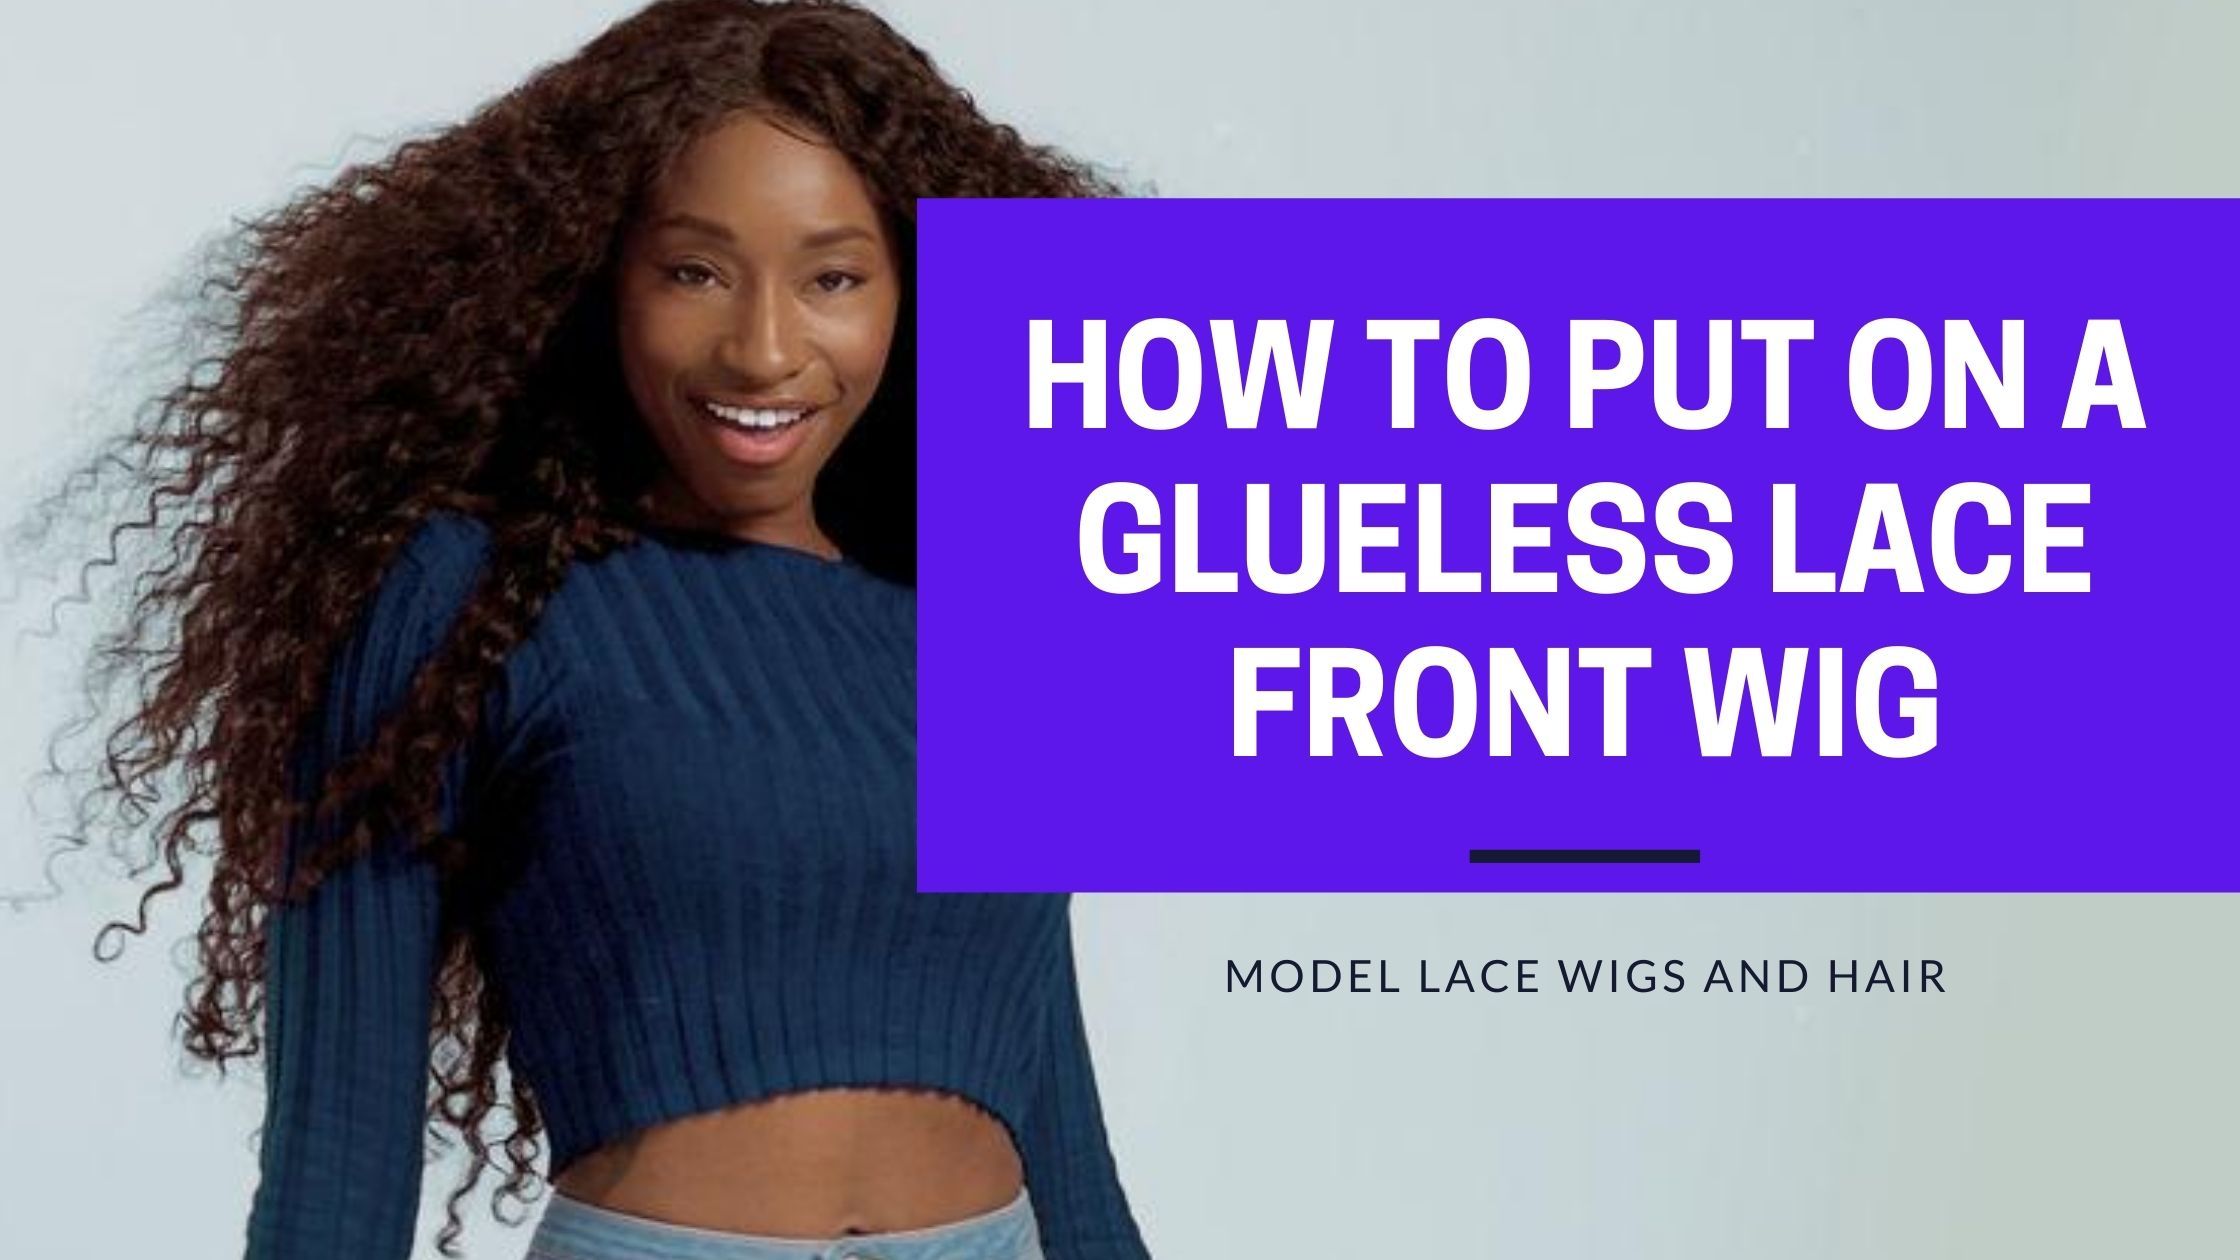 How to Put on a Glueless Lace Front Wig